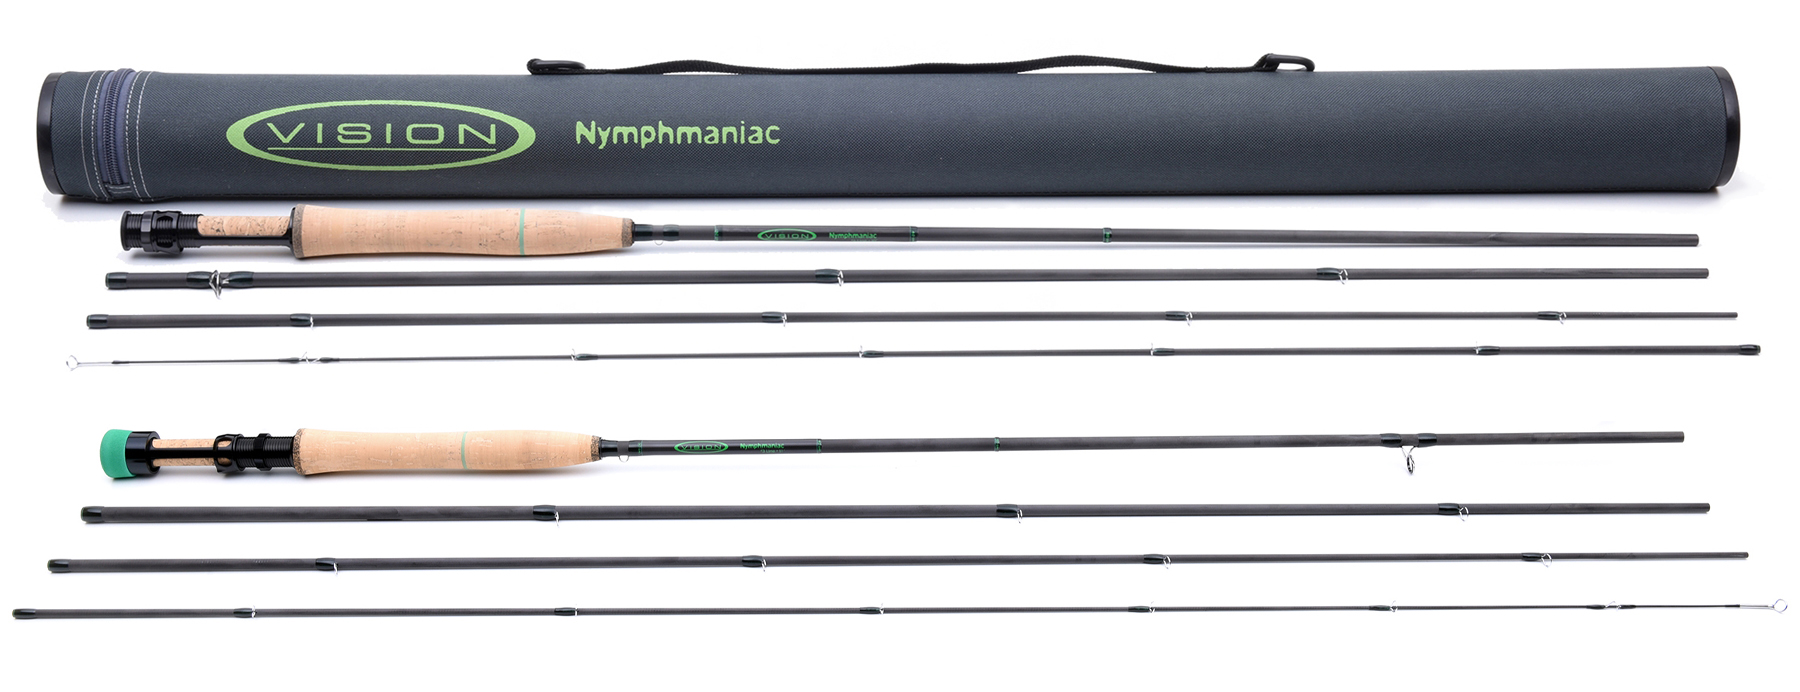 Vision Nymphmaniac Fly Rod - 10ft 6in #3